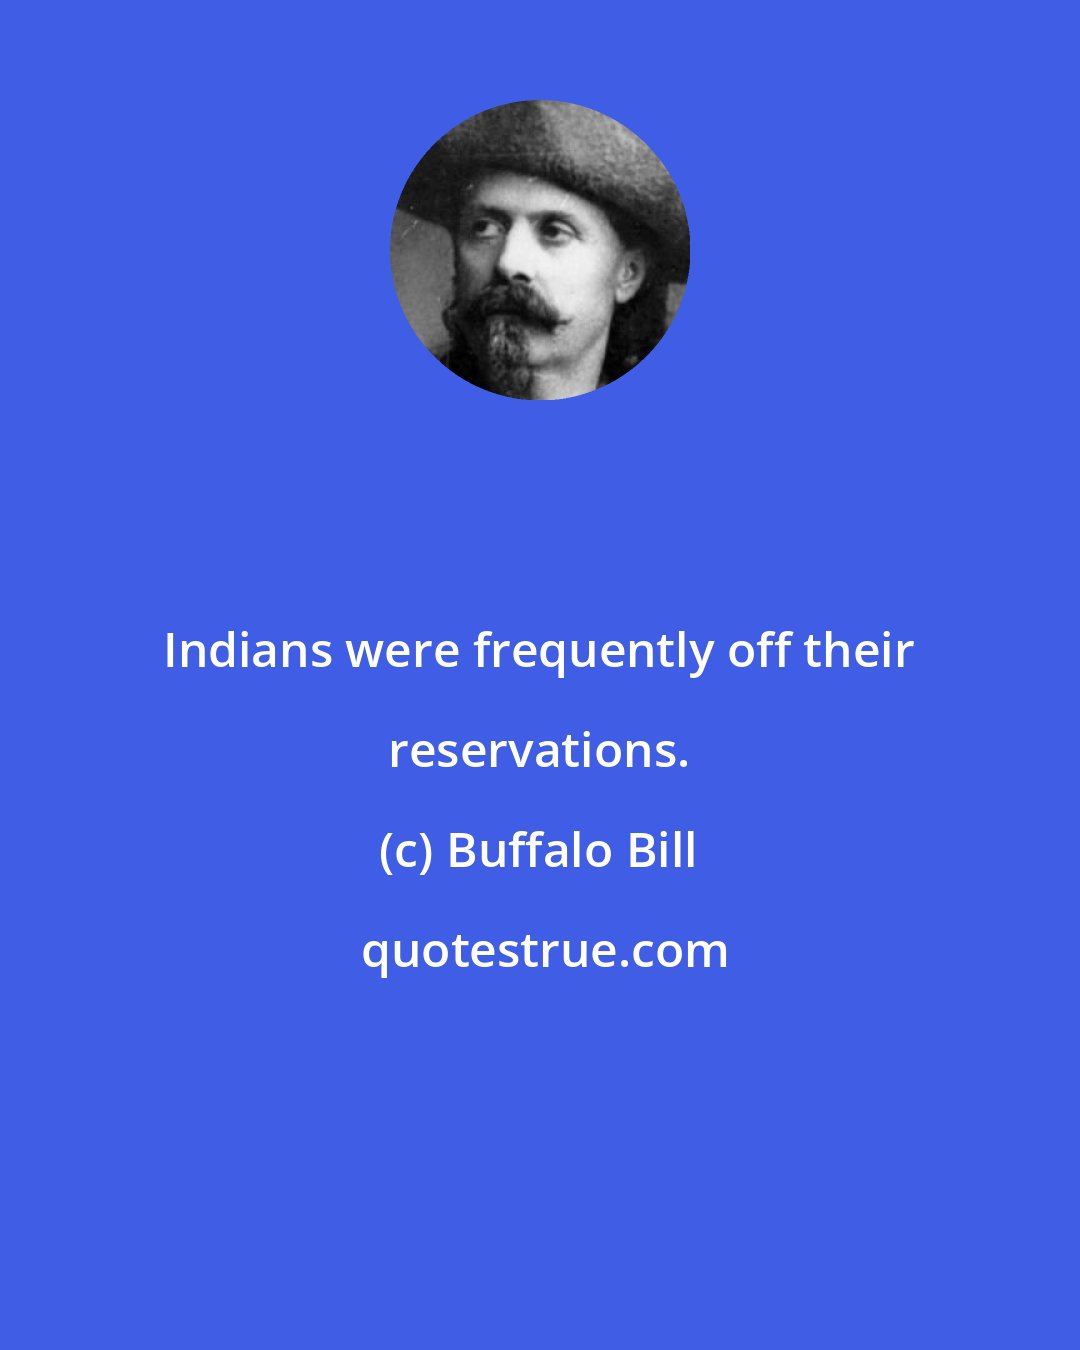 Buffalo Bill: Indians were frequently off their reservations.